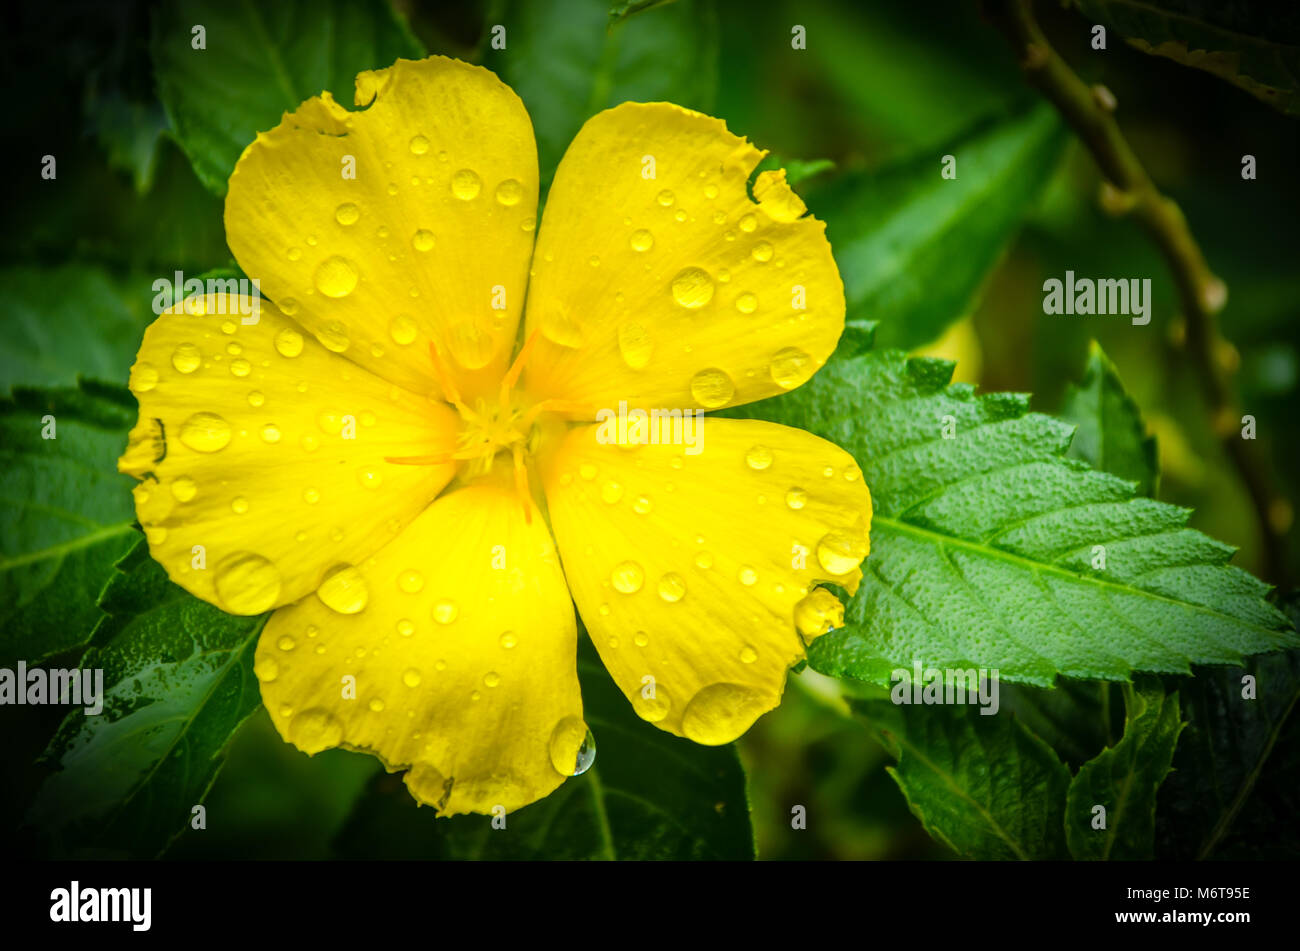 Water drops on a full blossomed yellow flower surrounded by green leaves Stock Photo